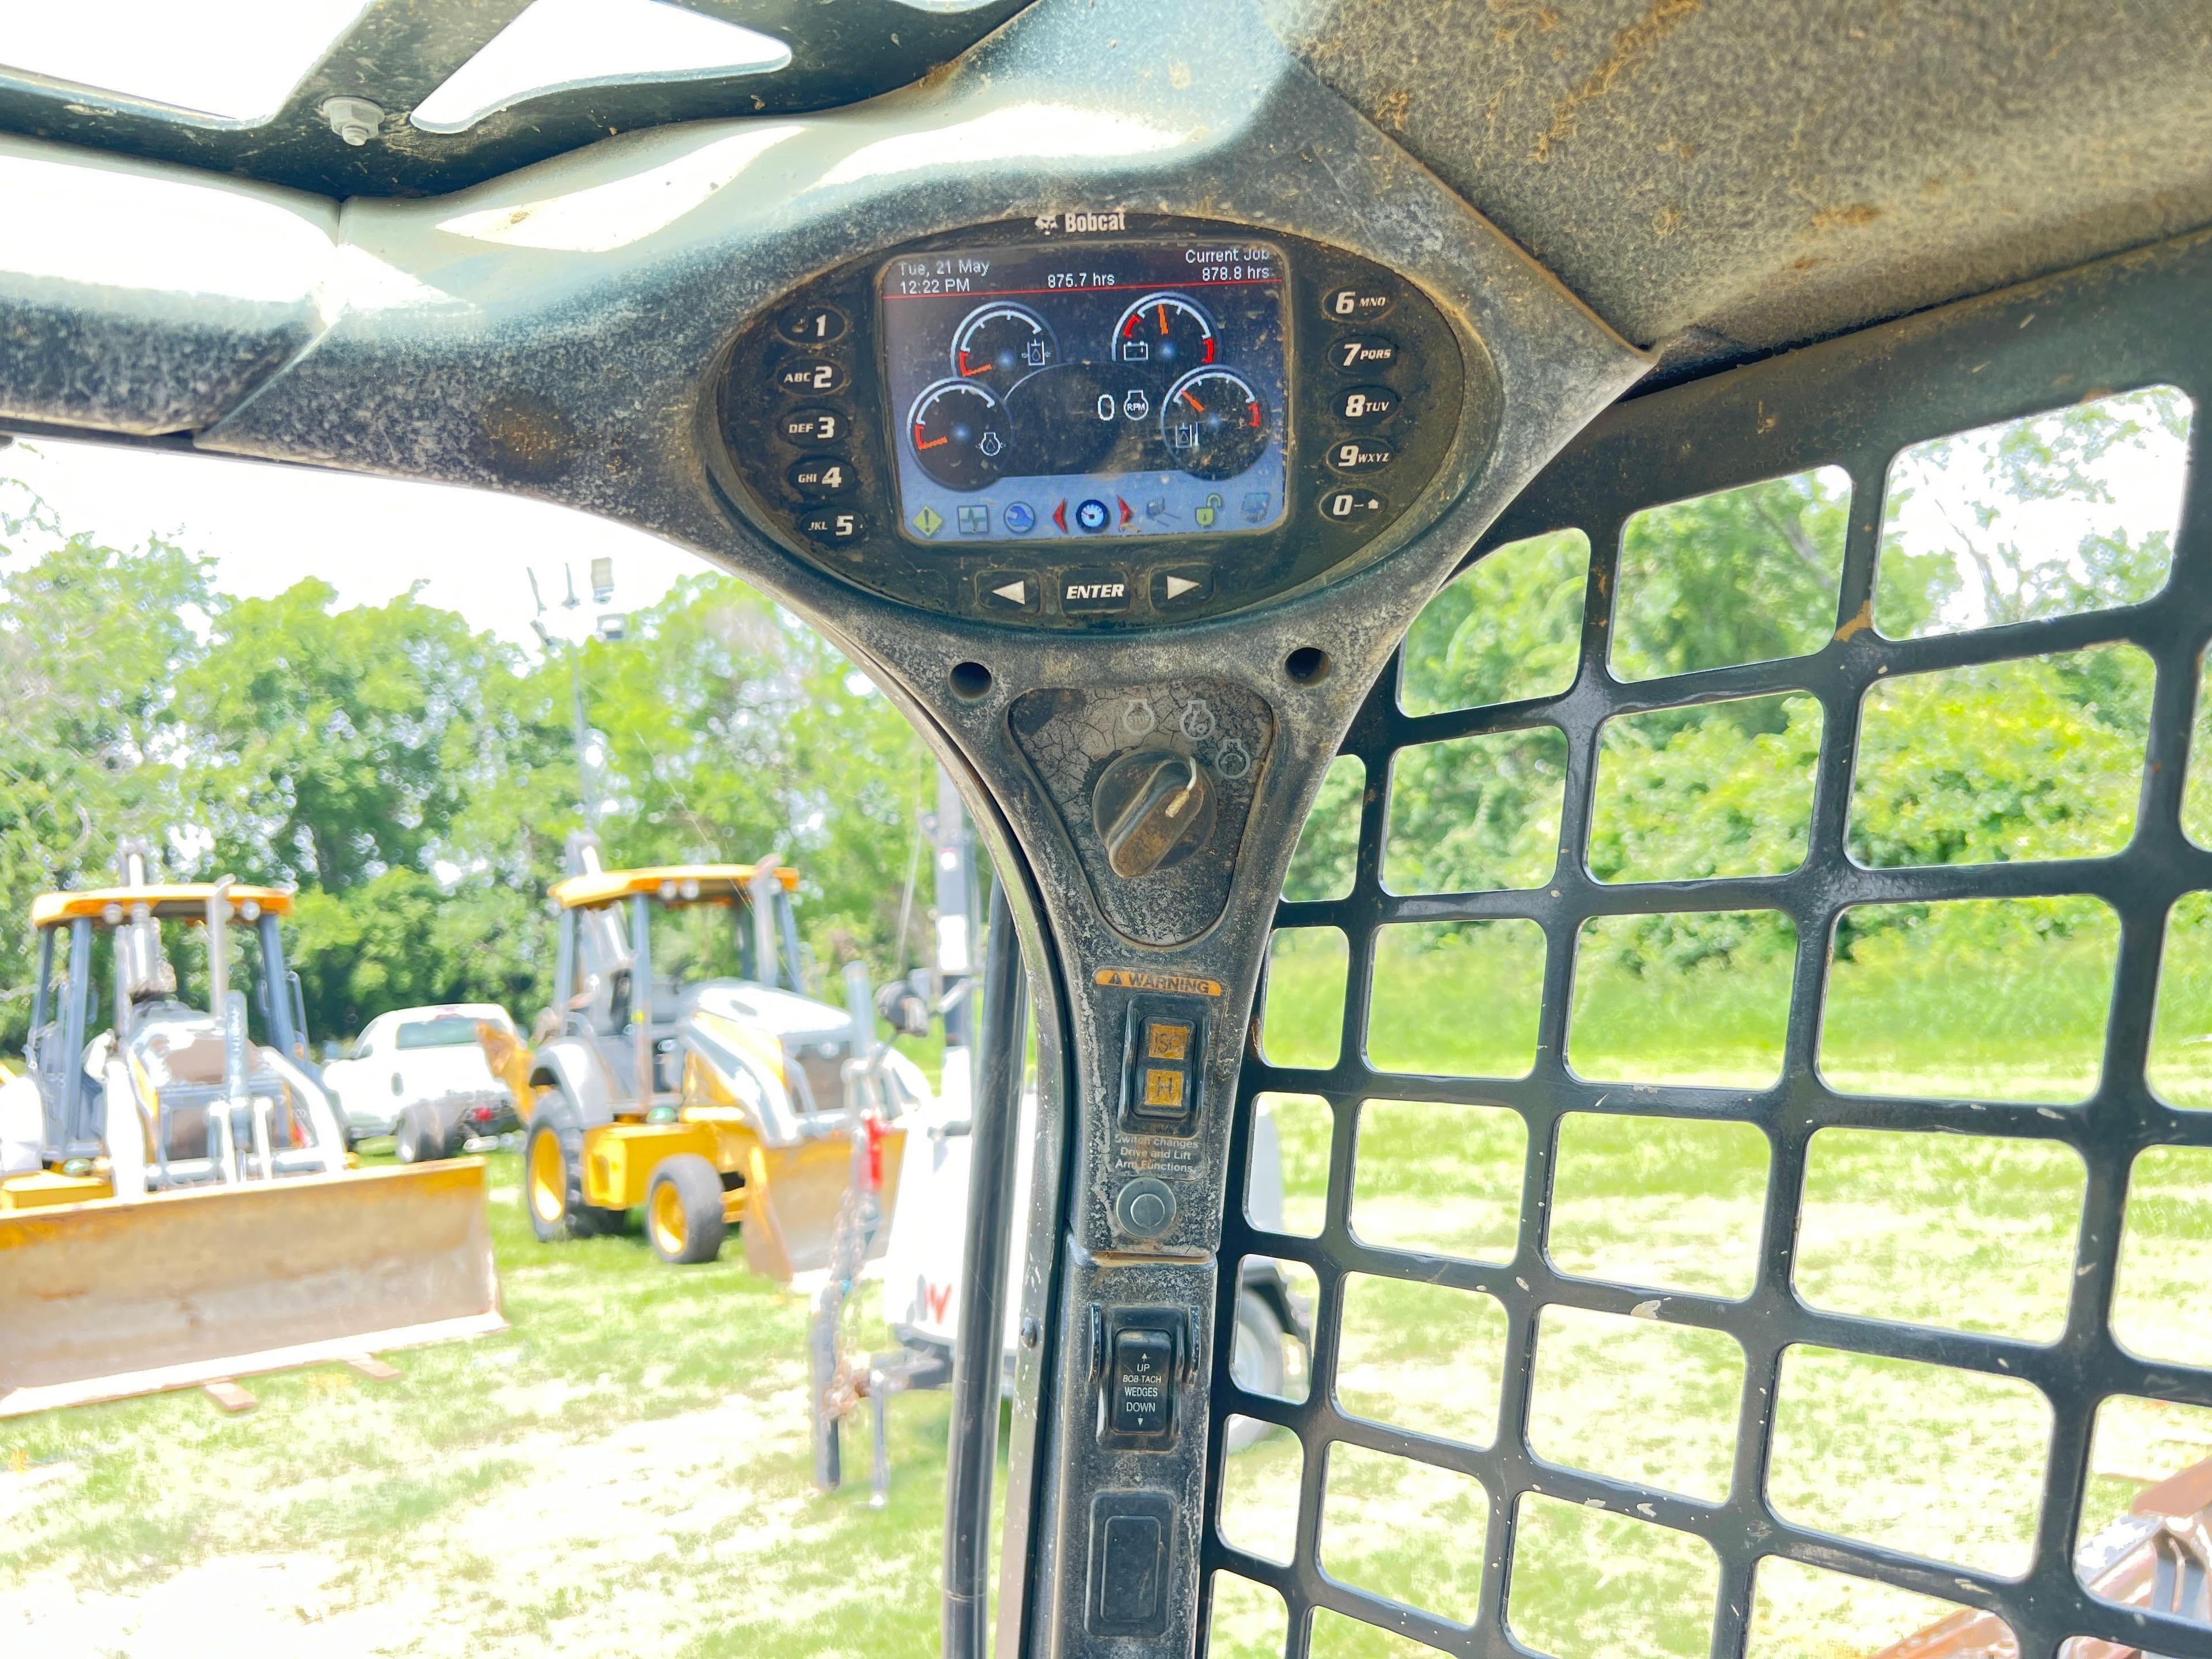 2020 BOBCAT T595 RUBBER TRACKED SKID STEER SN:B3NK36717 powered by diesel engine, equipped with